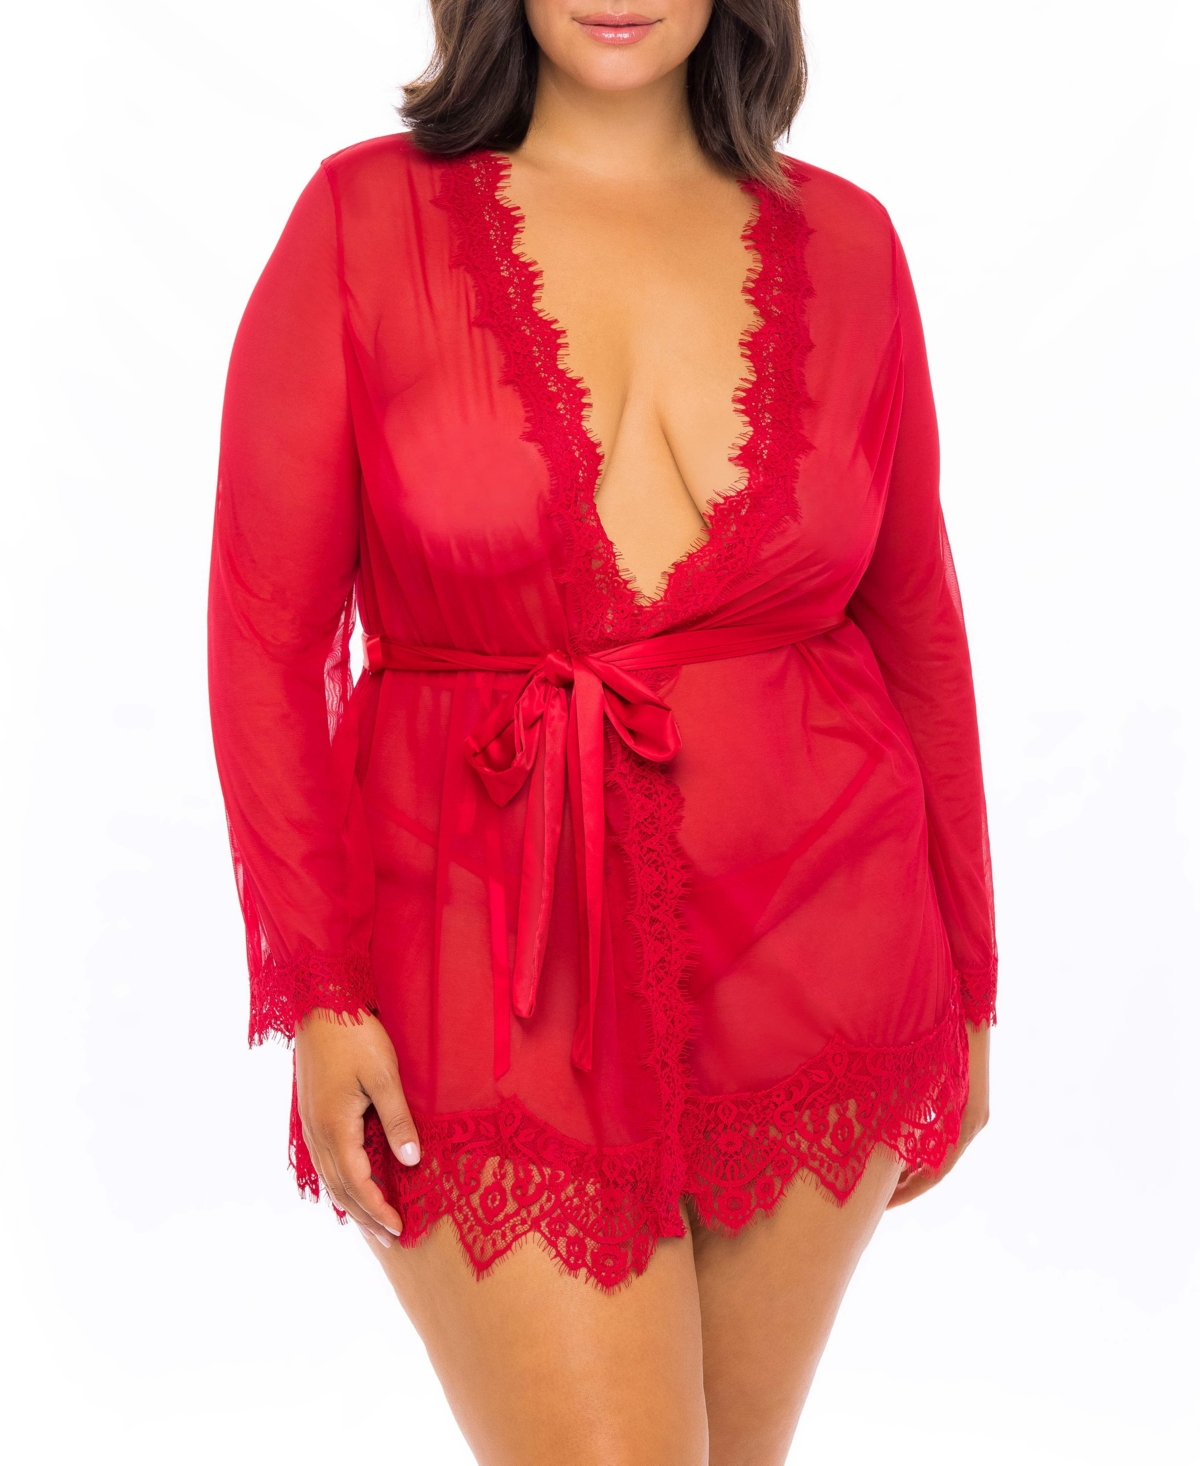 Plus Size Eyelash Lace 2pc Lingerie Set, Robe with Satin Sash and G-String - Red